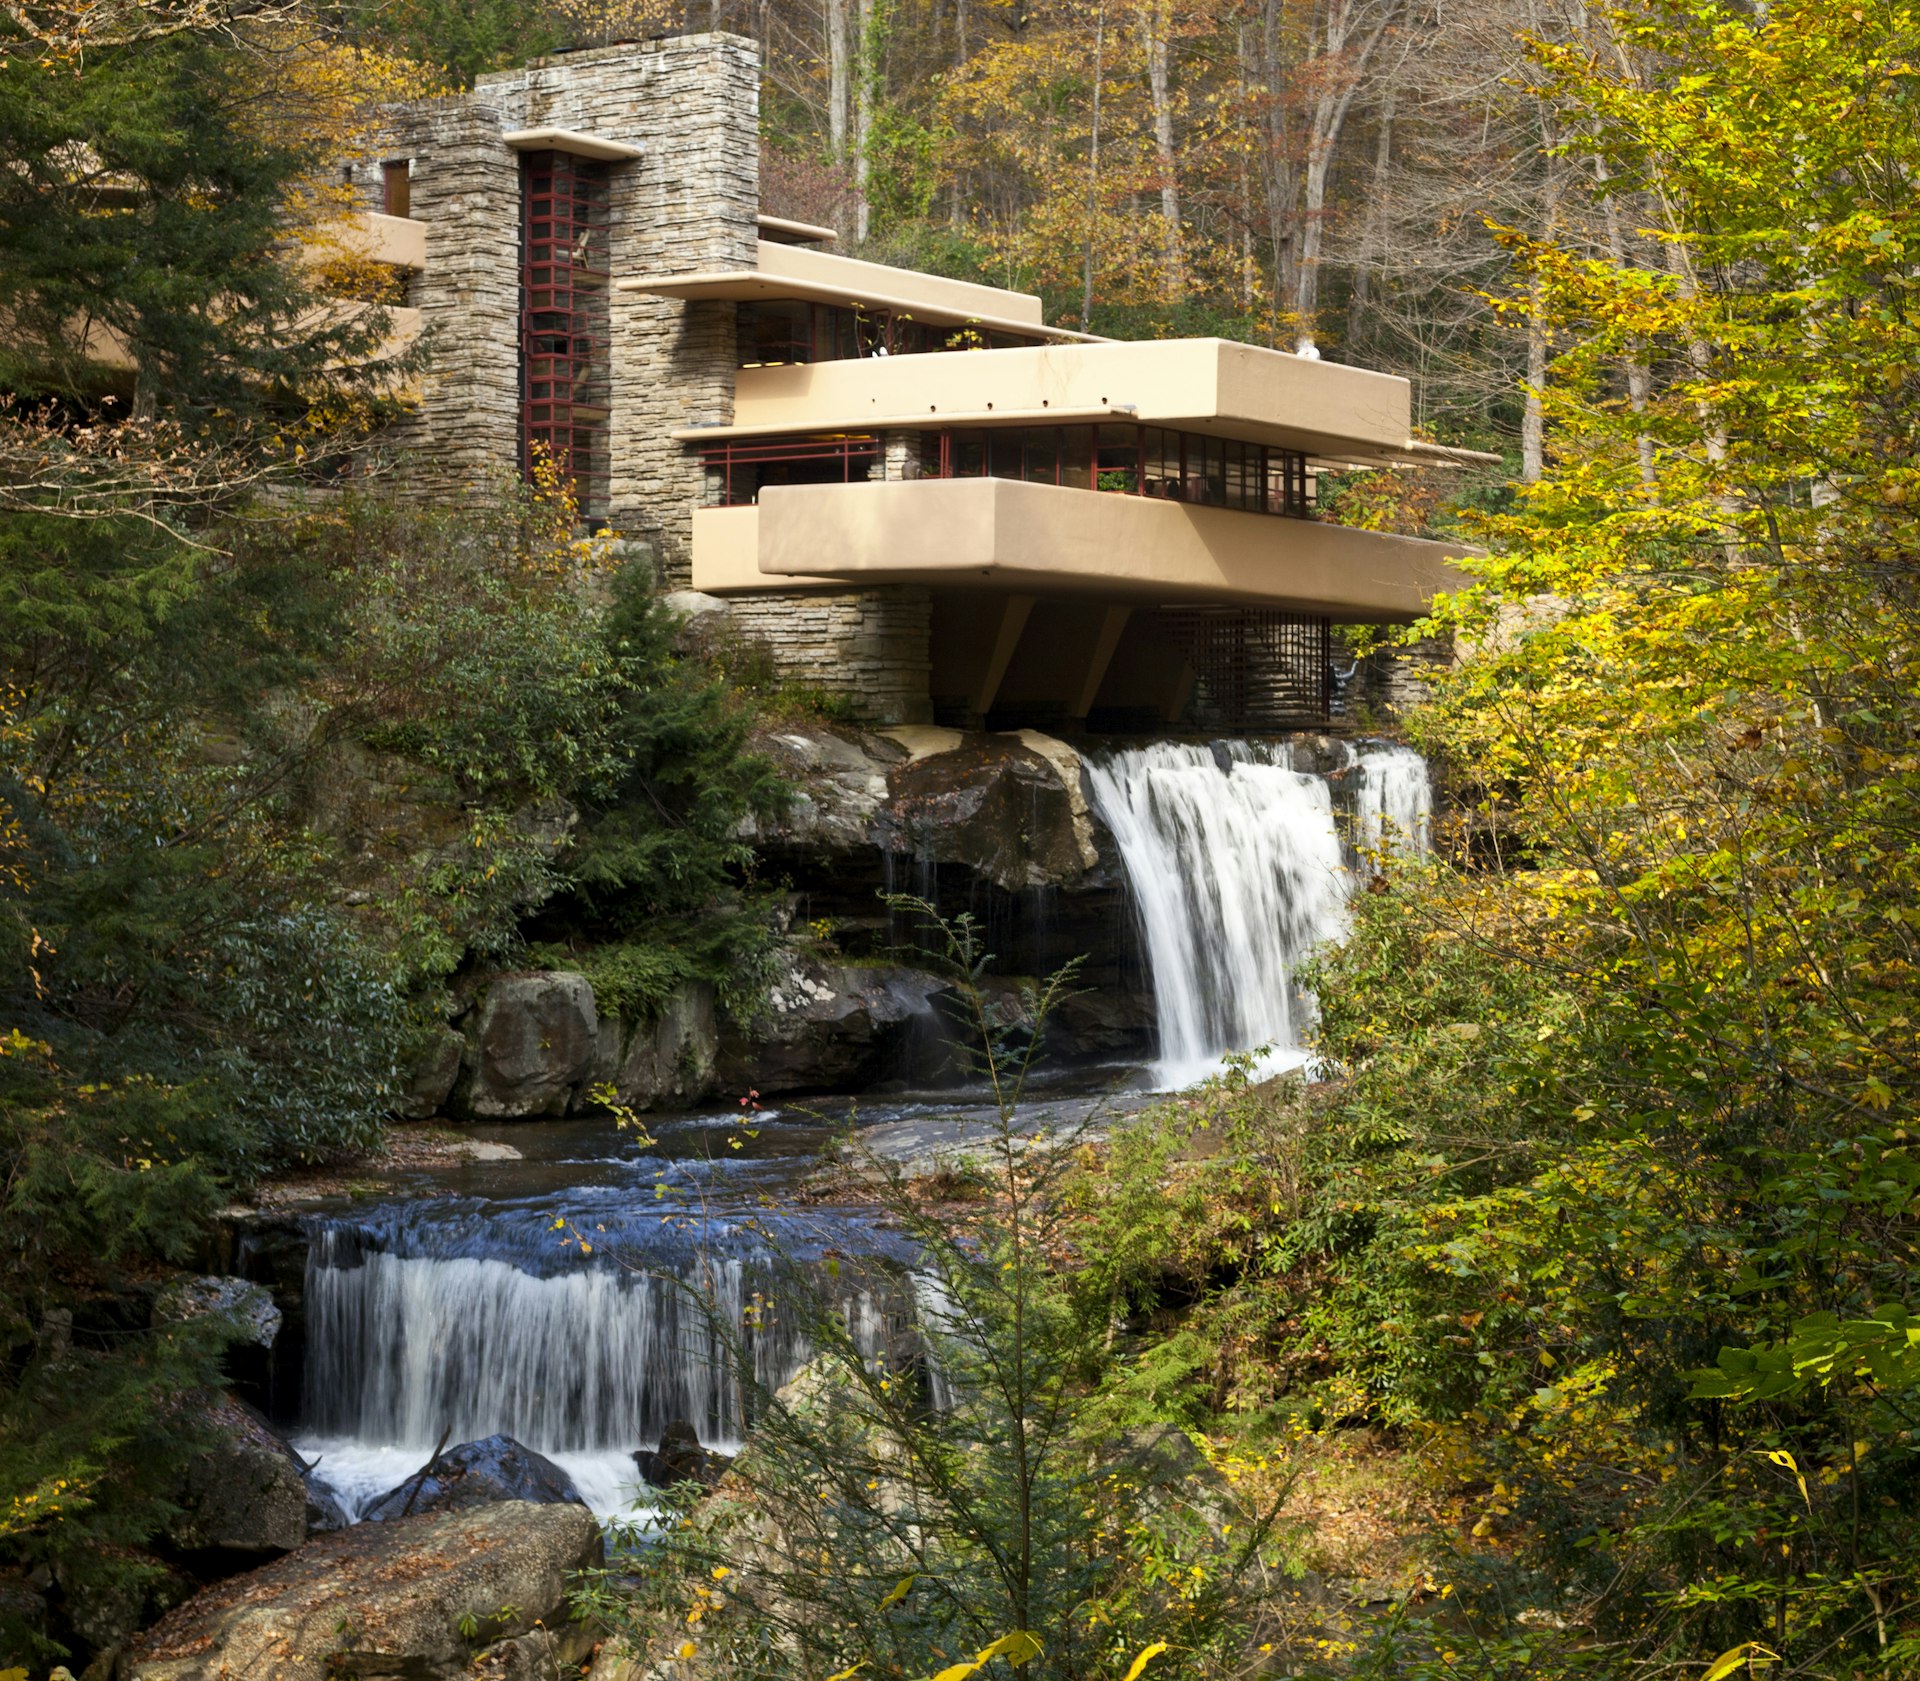 Falling Water in Laurel Highlands is a Frank Lloyd Wright's masterpiece, within Bear Run Nature Reserve. There is a building overlooking a stream with two small waterfalls and flanked by tress and fallen leaves. 